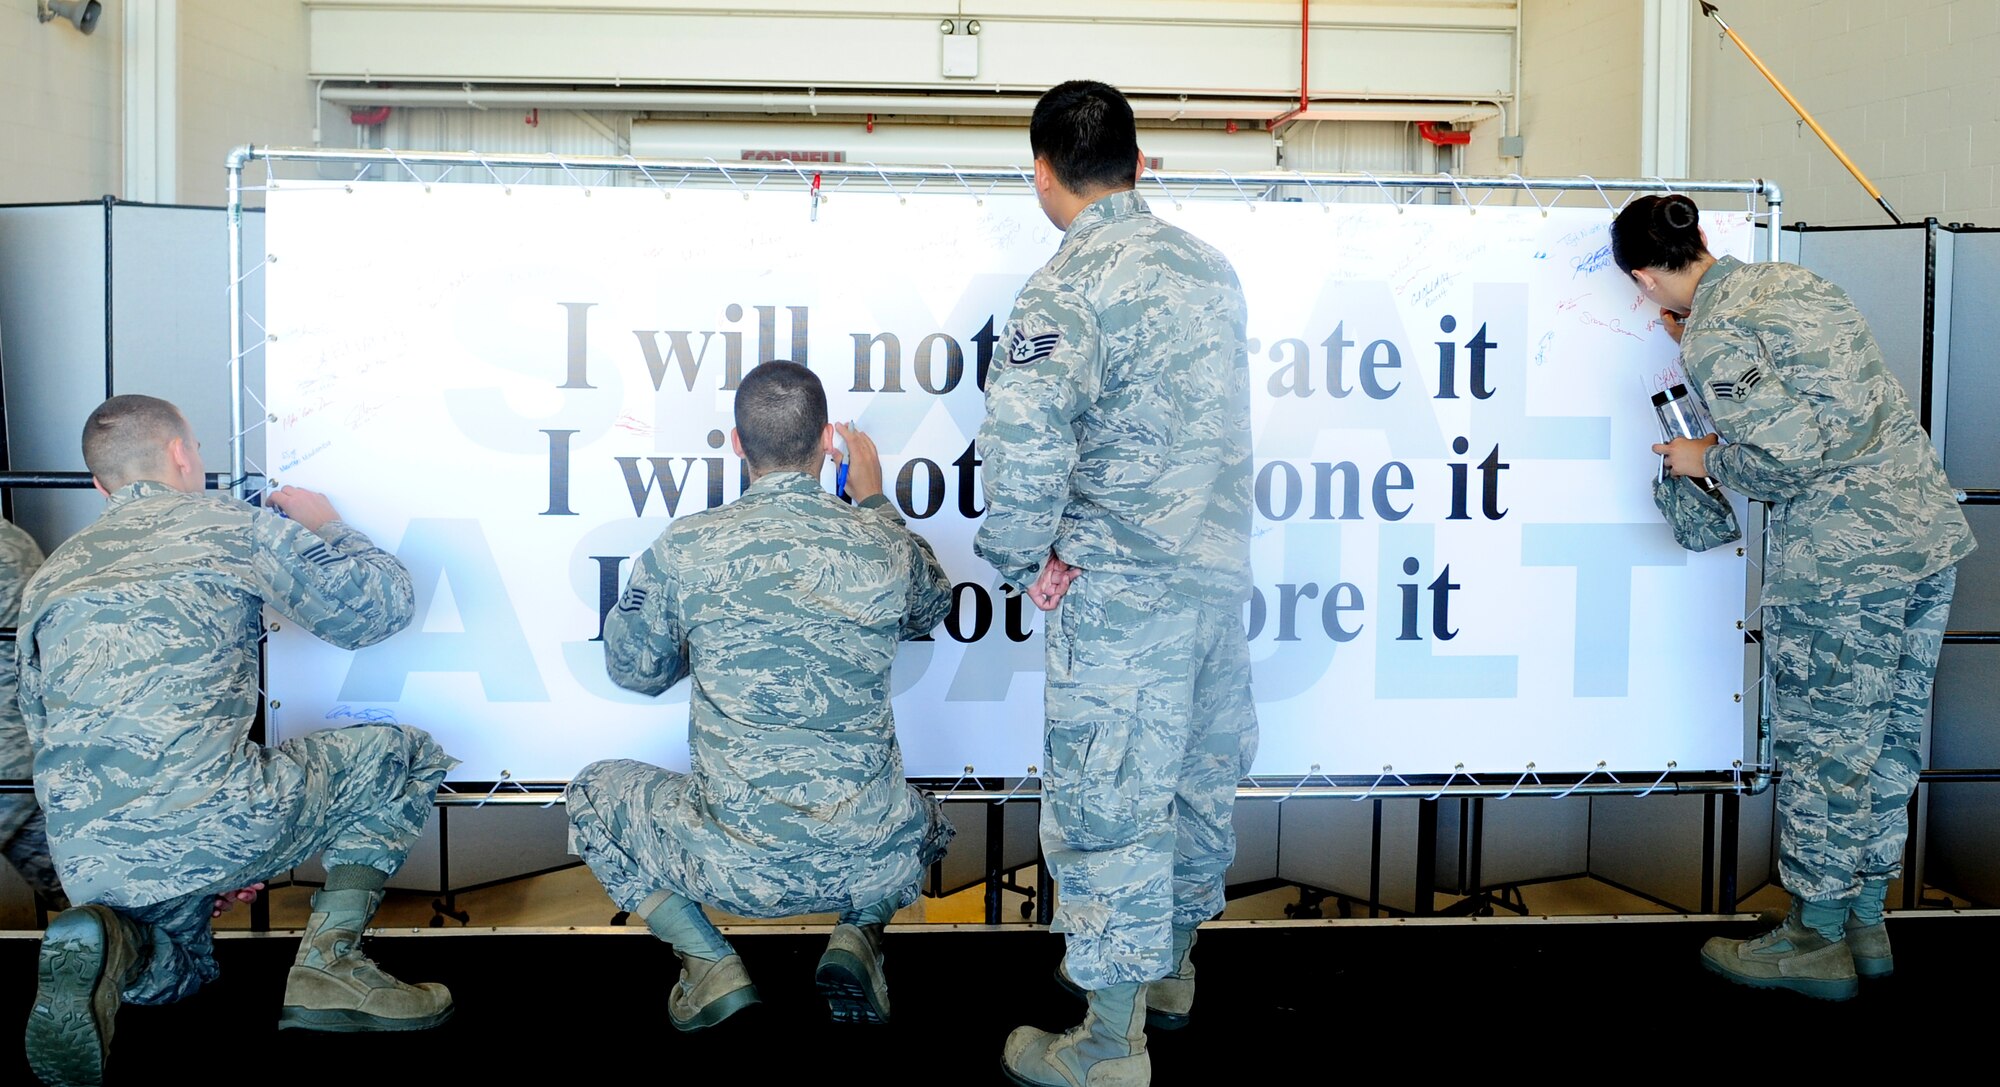 Beale Airmen sign a banner pledging to stop sexual assault during a sexual assault prevention and response brief at Beale Air Force Base, Calif., June 26, 2013. All of Team Beale was given an opportunity to sign the pledge. (U.S. Air Force photo by Airman 1st Class Bobby Cummings/Released)